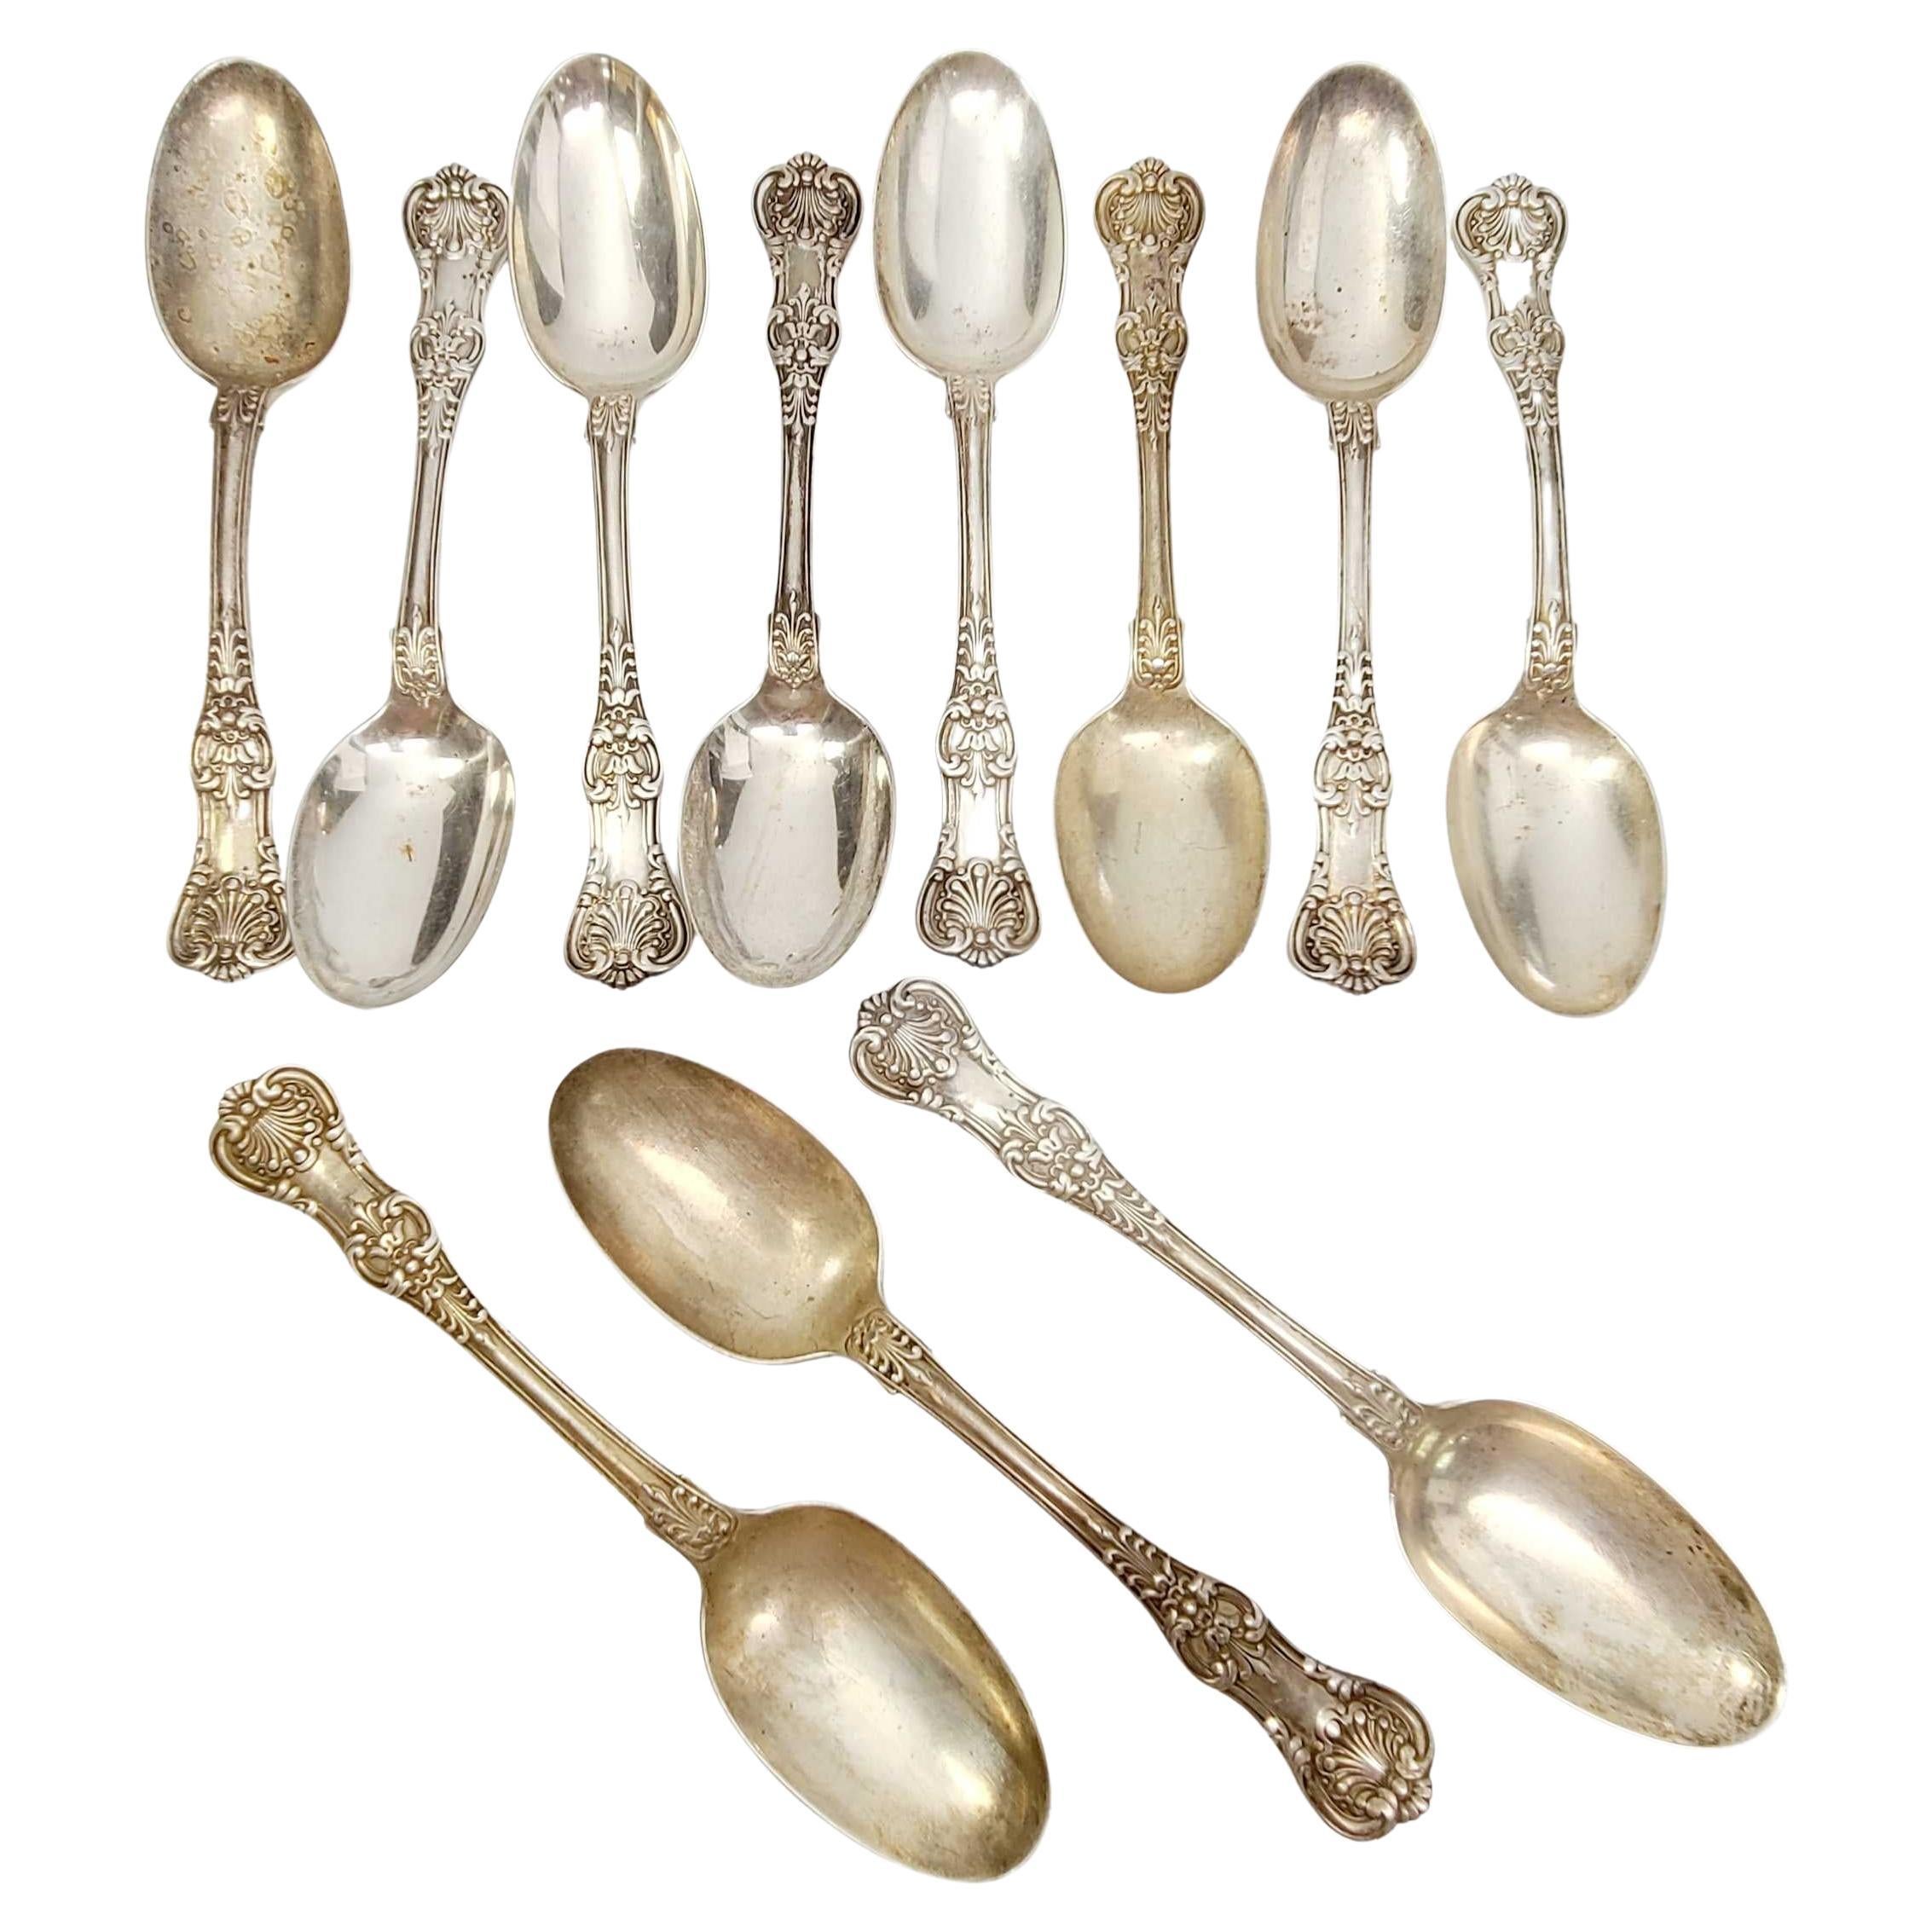 Tiffany & Co Sterling English King Dessert/Oval Soup Spoons Set of 11